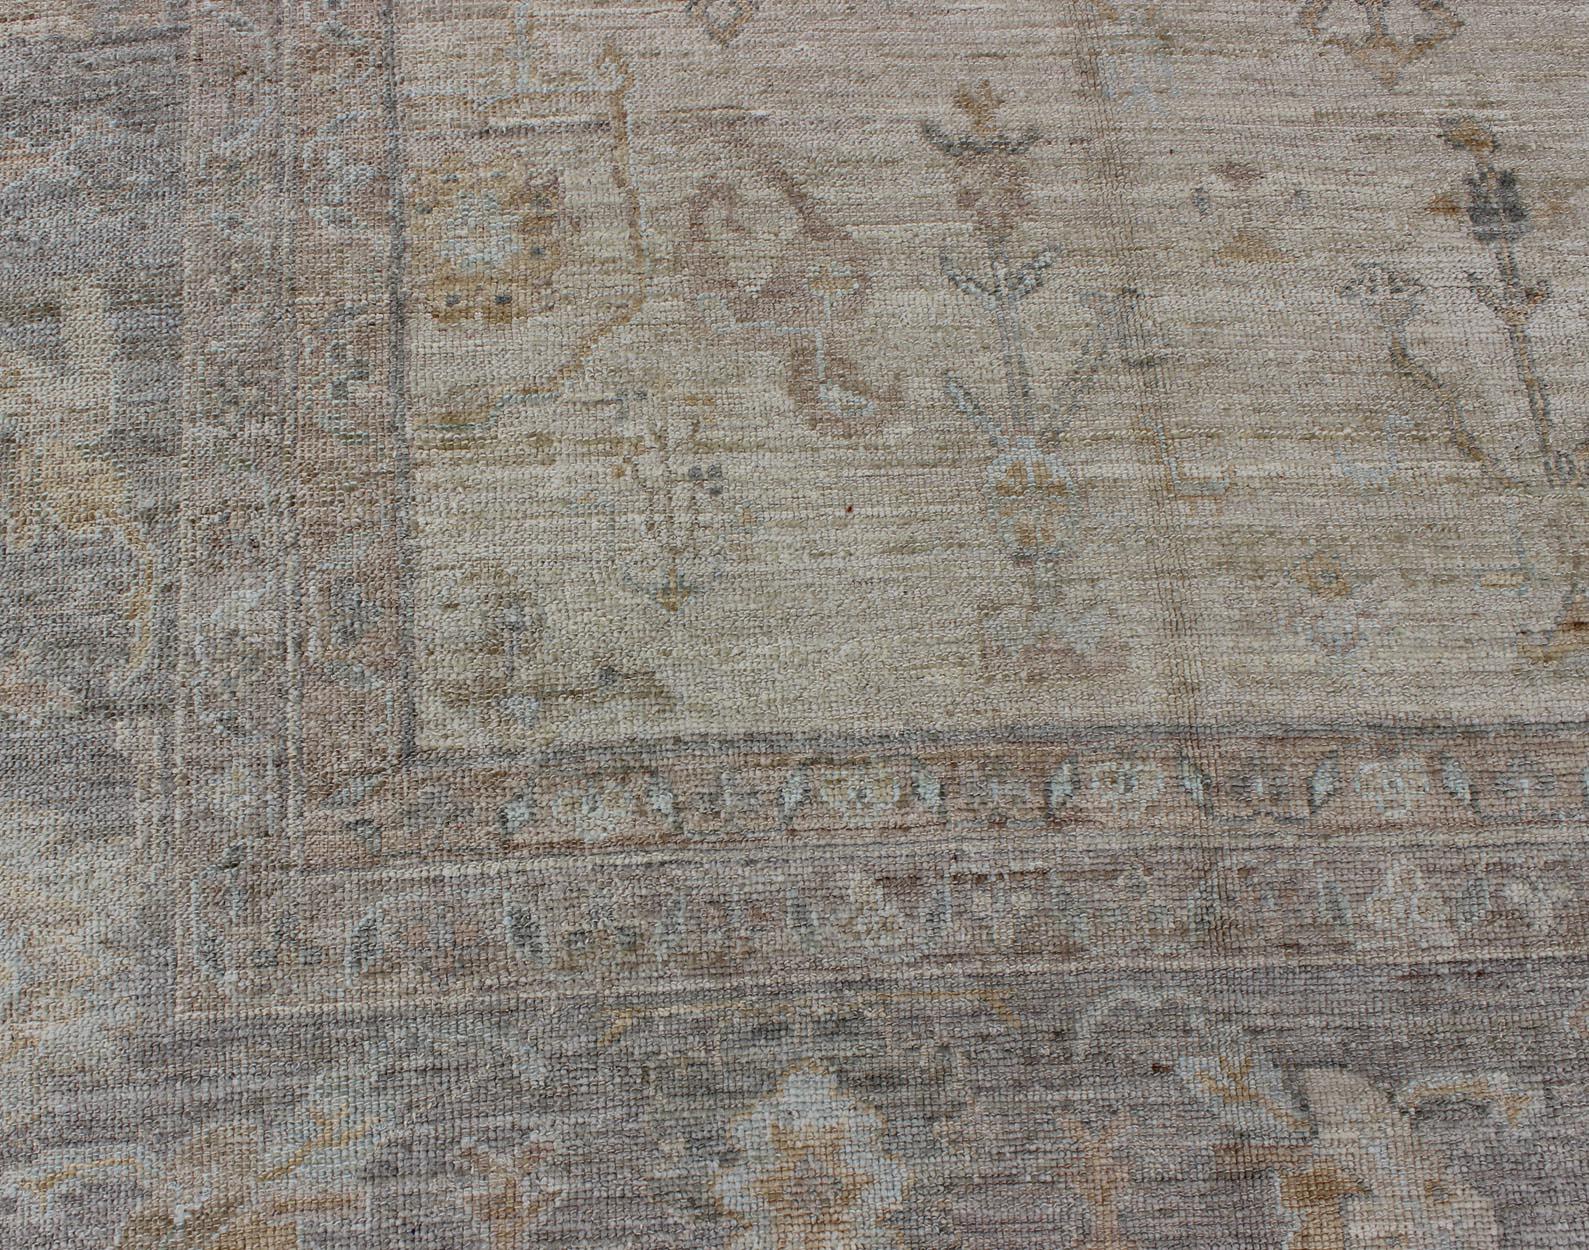 Turkish Angora Oushak Rug with All-Over Vining Floral Design Keivan Woven Arts  For Sale 2